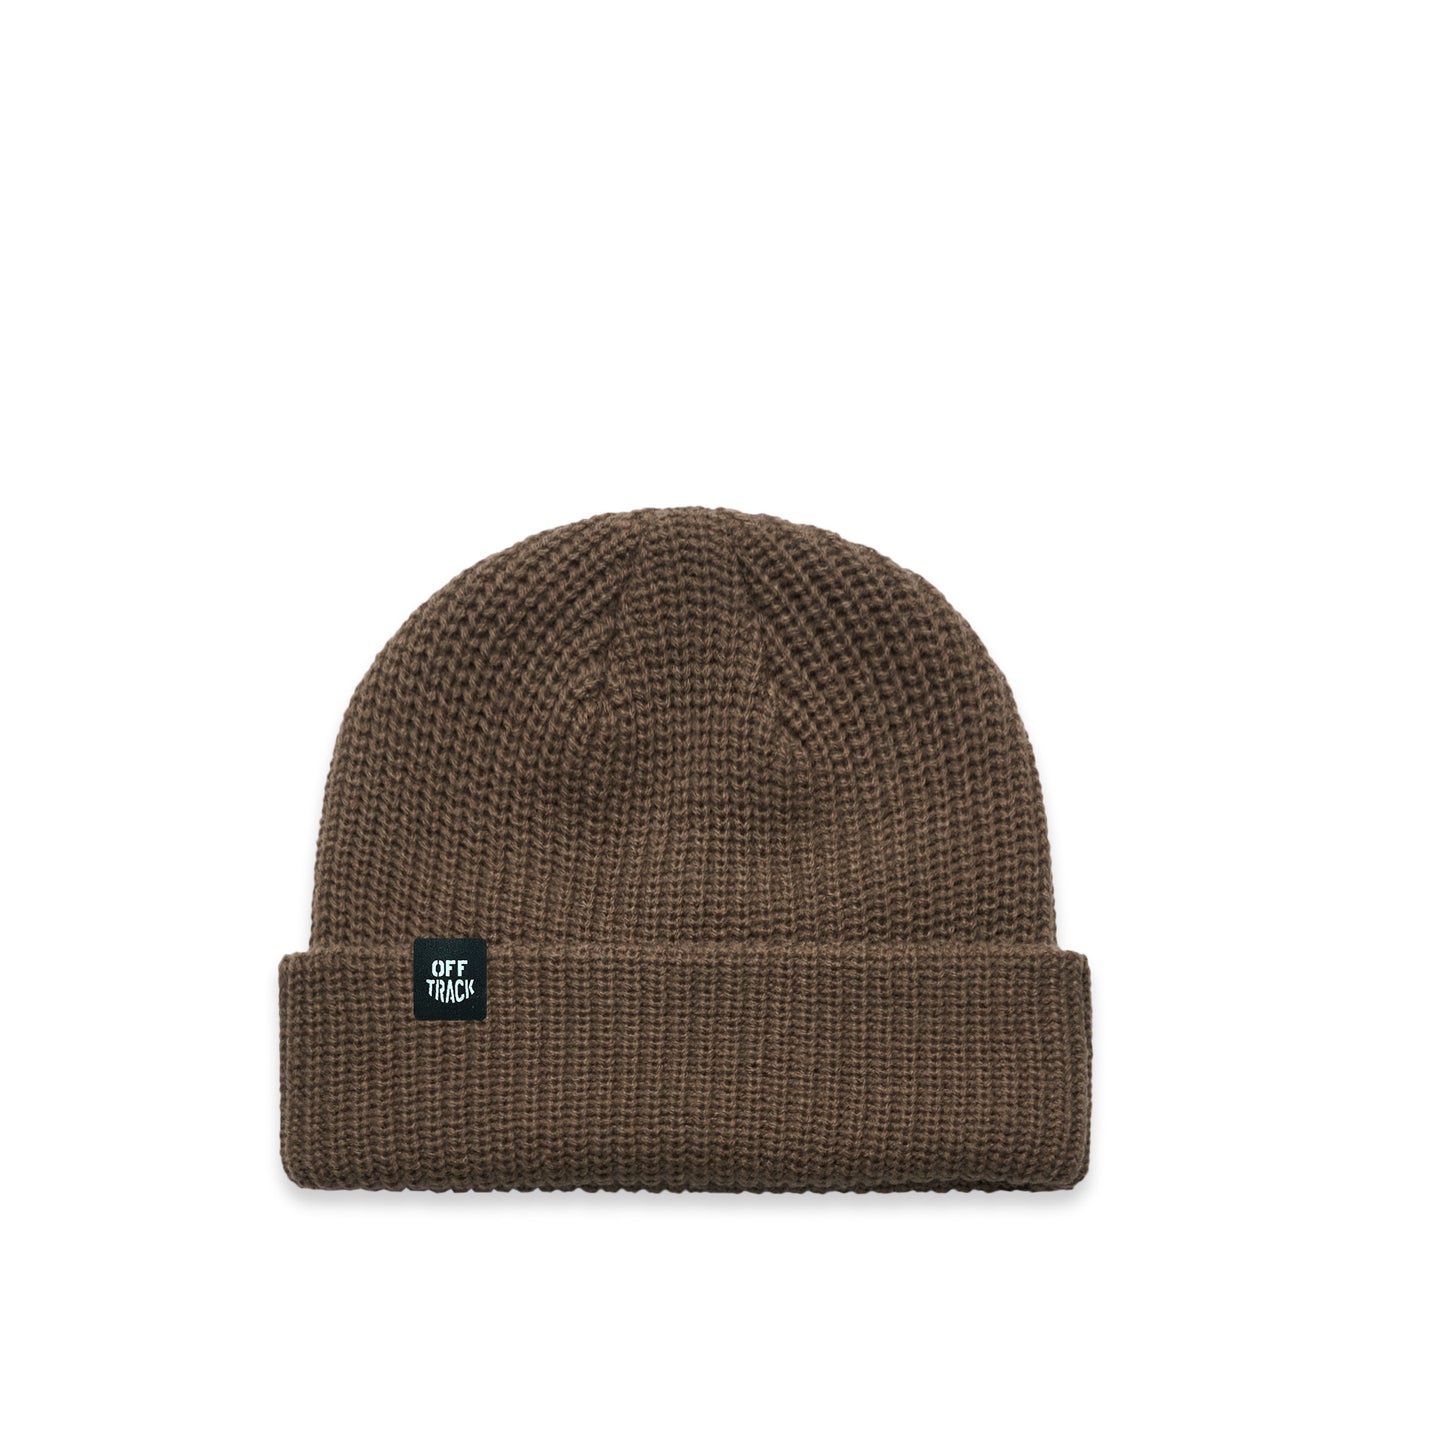 OFF TRACK ENDURO BEANIE -  VARIOUS COLORS